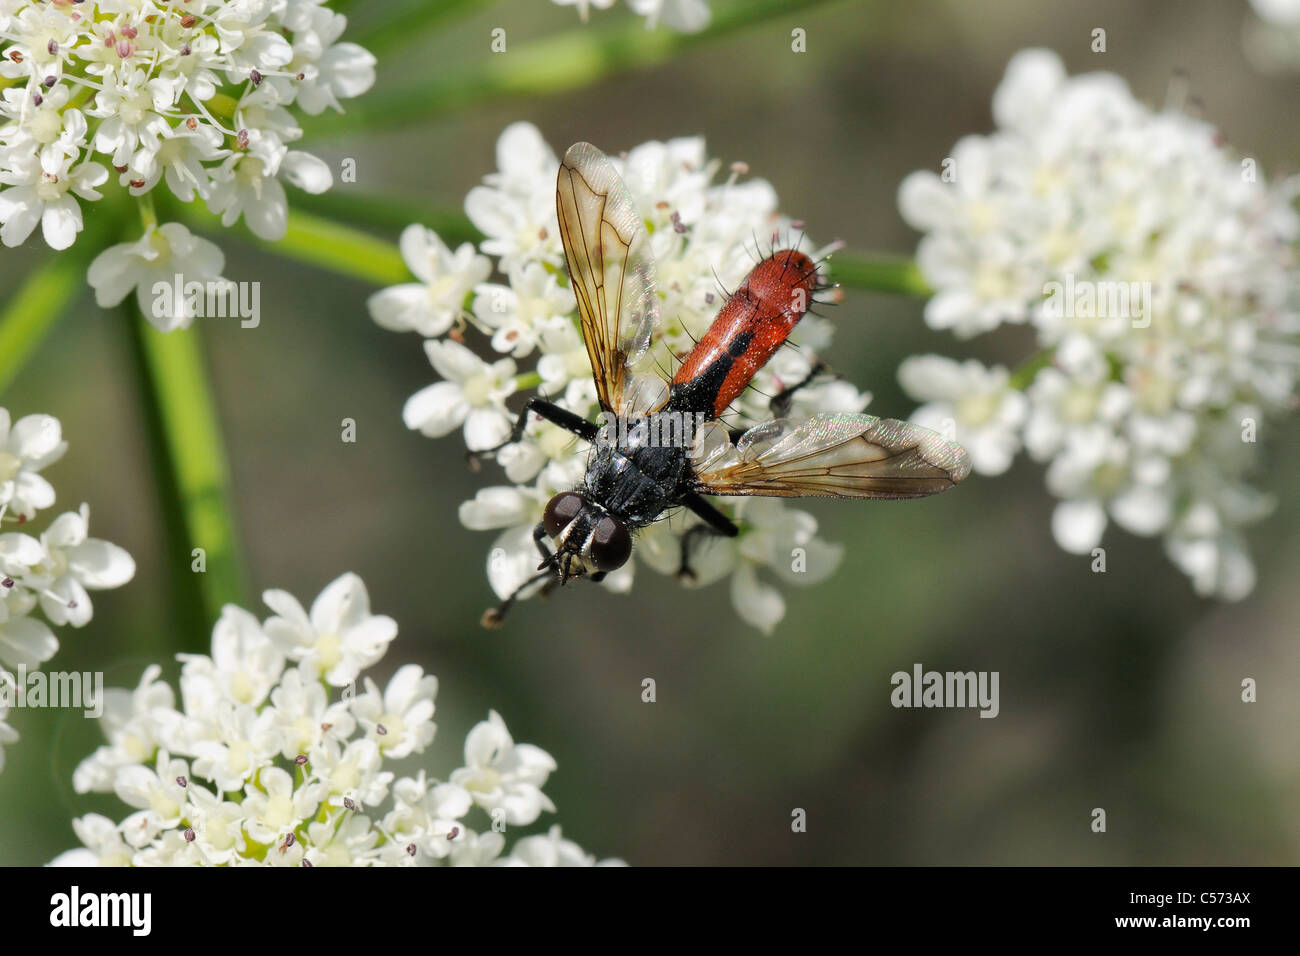 Parasite fly or Tachinid fly (Cylindromyia bicolor) female feeding on Wild angelica (Angelica sylvestris) flowers, Corsica. Stock Photo